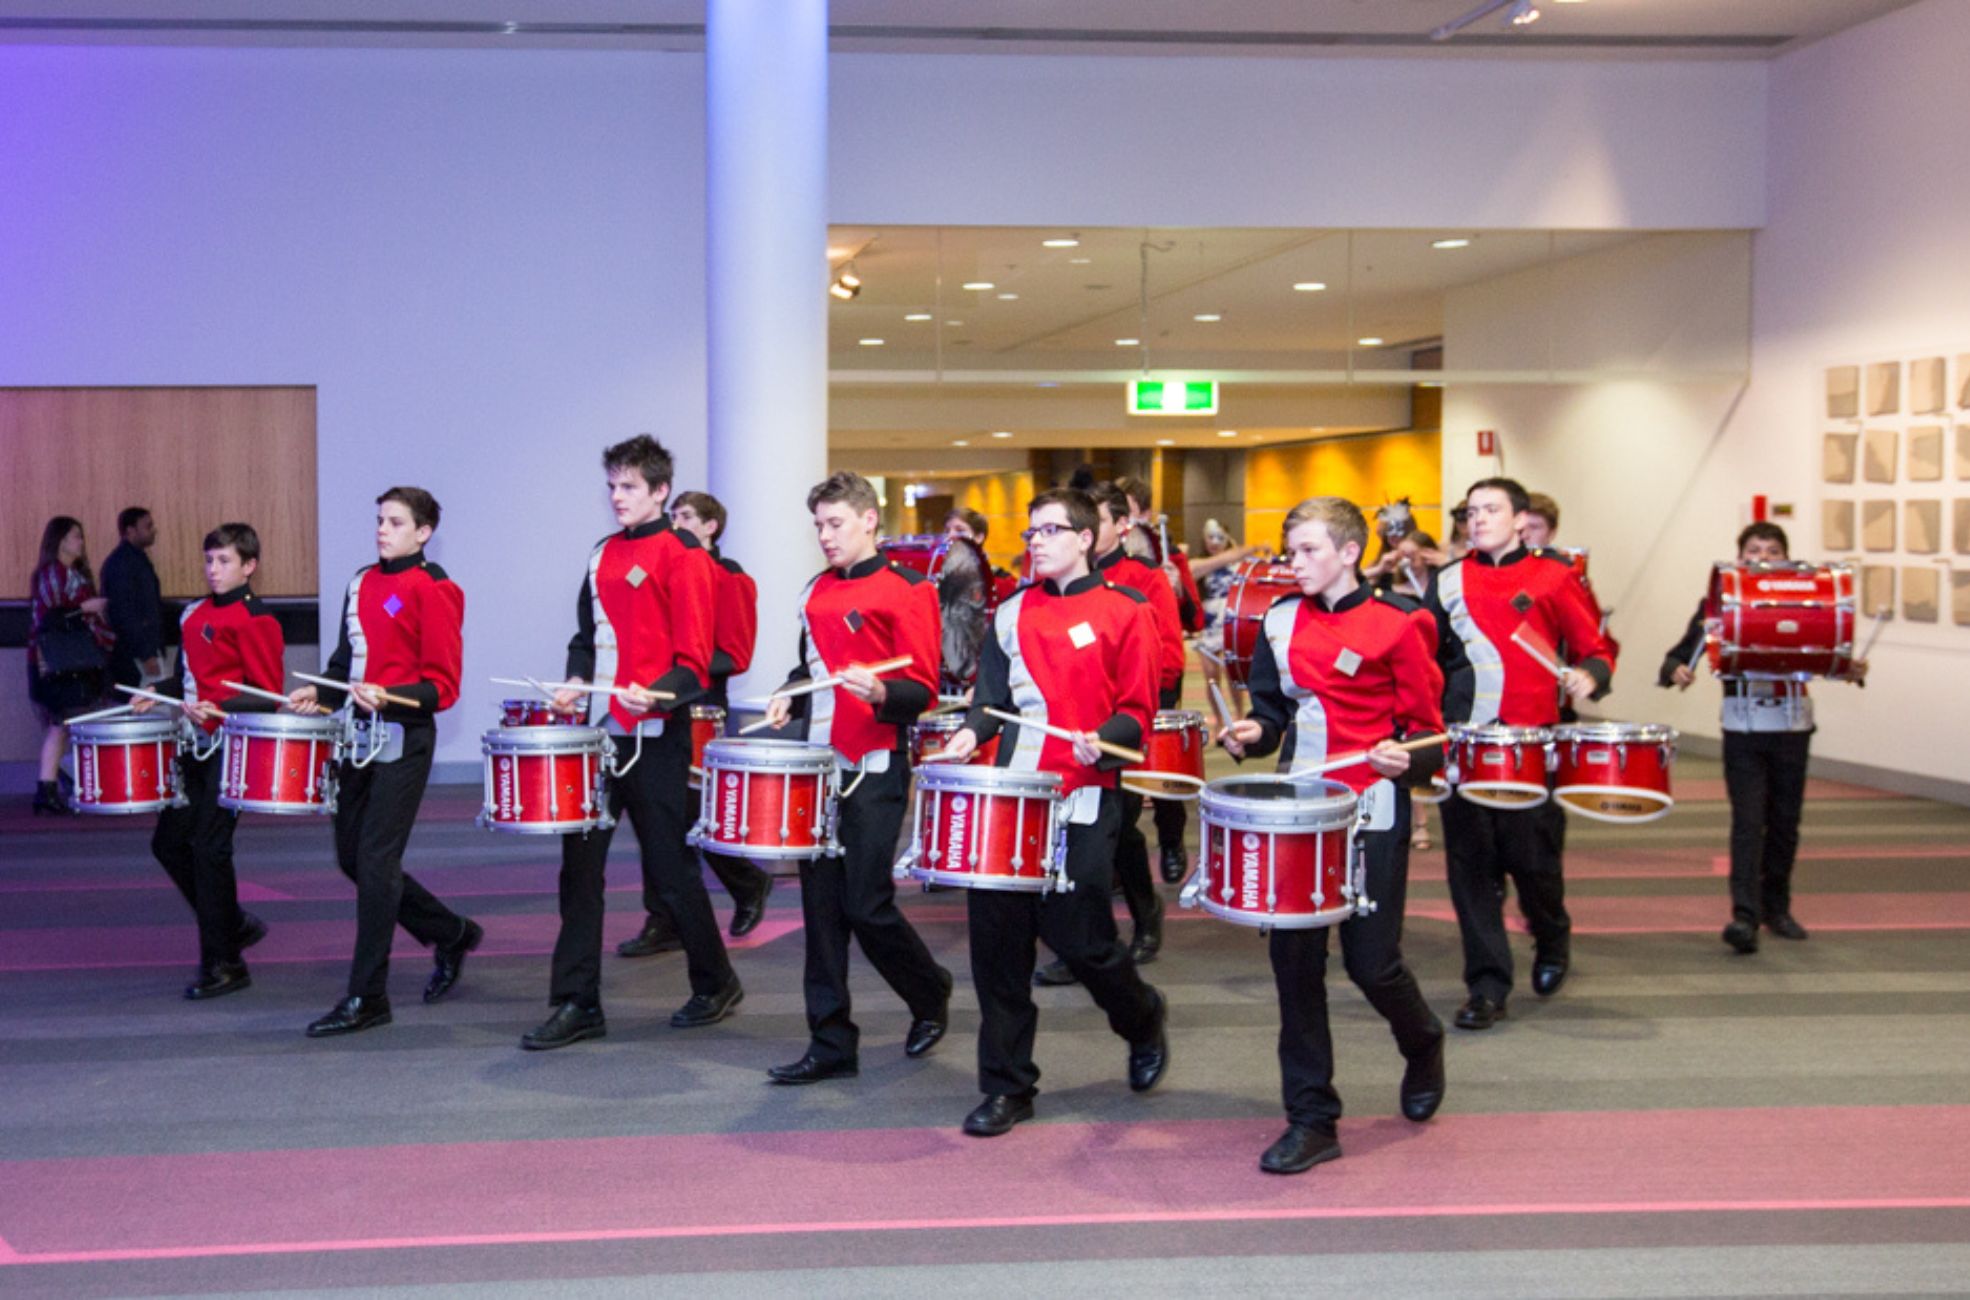 Marching Band By Roving Entertainment At Event